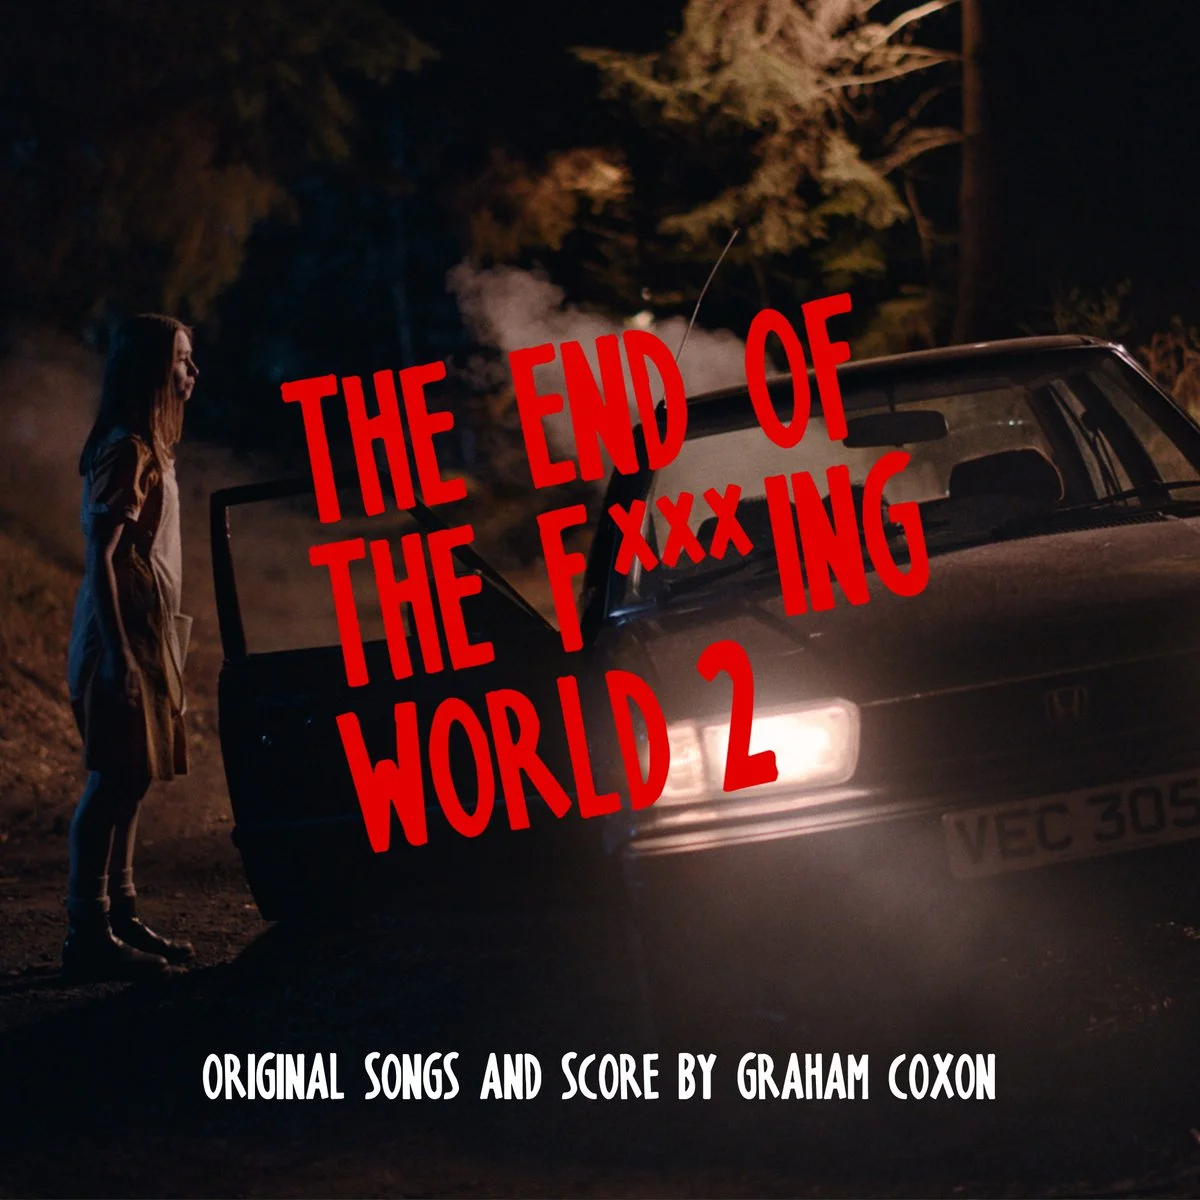 New release The End Of The Fucking World